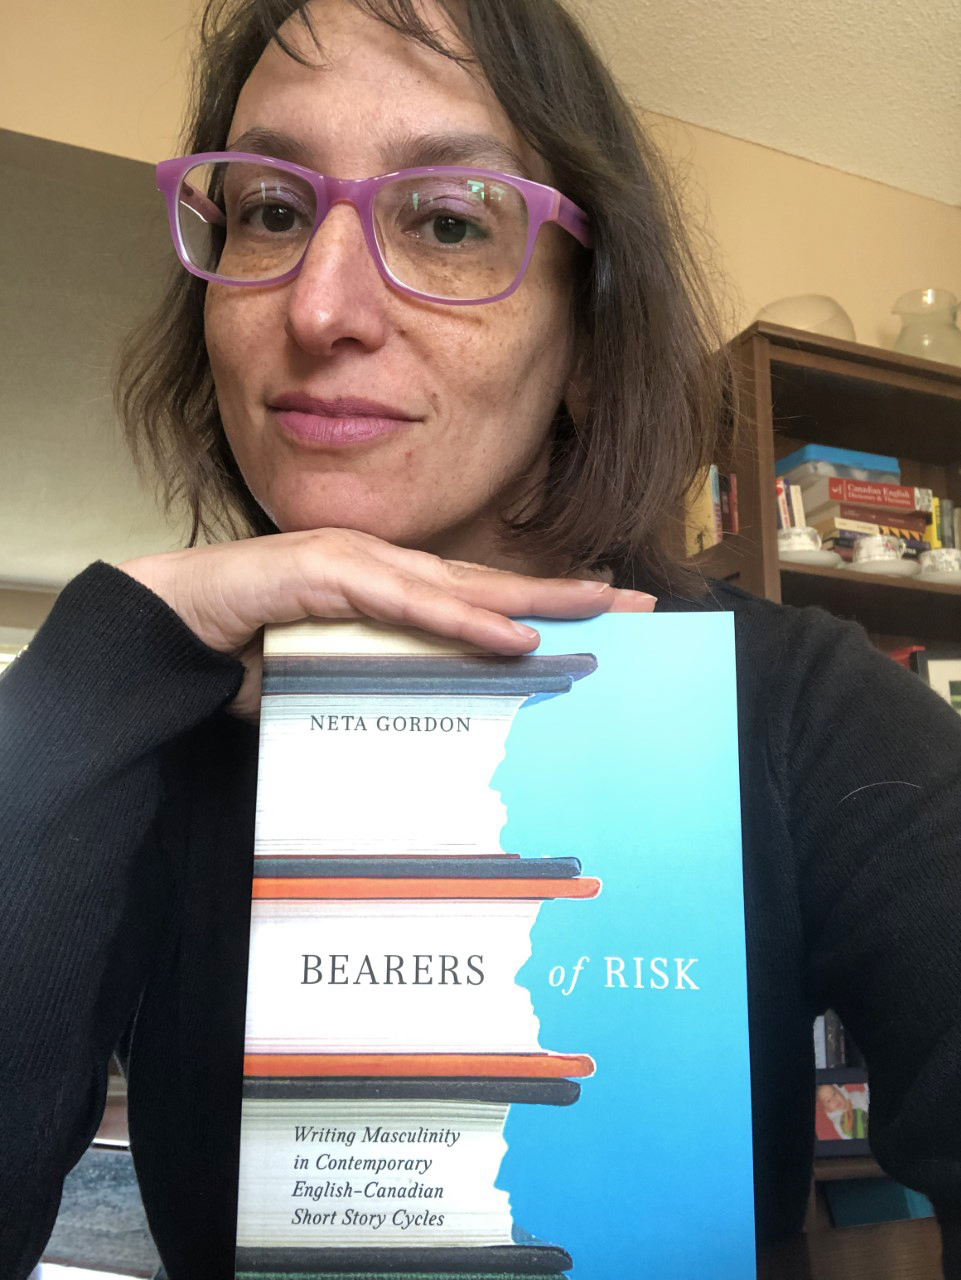 A woman with brown hair and glasses rests her hand on the cover of the book Bearers of Risk.